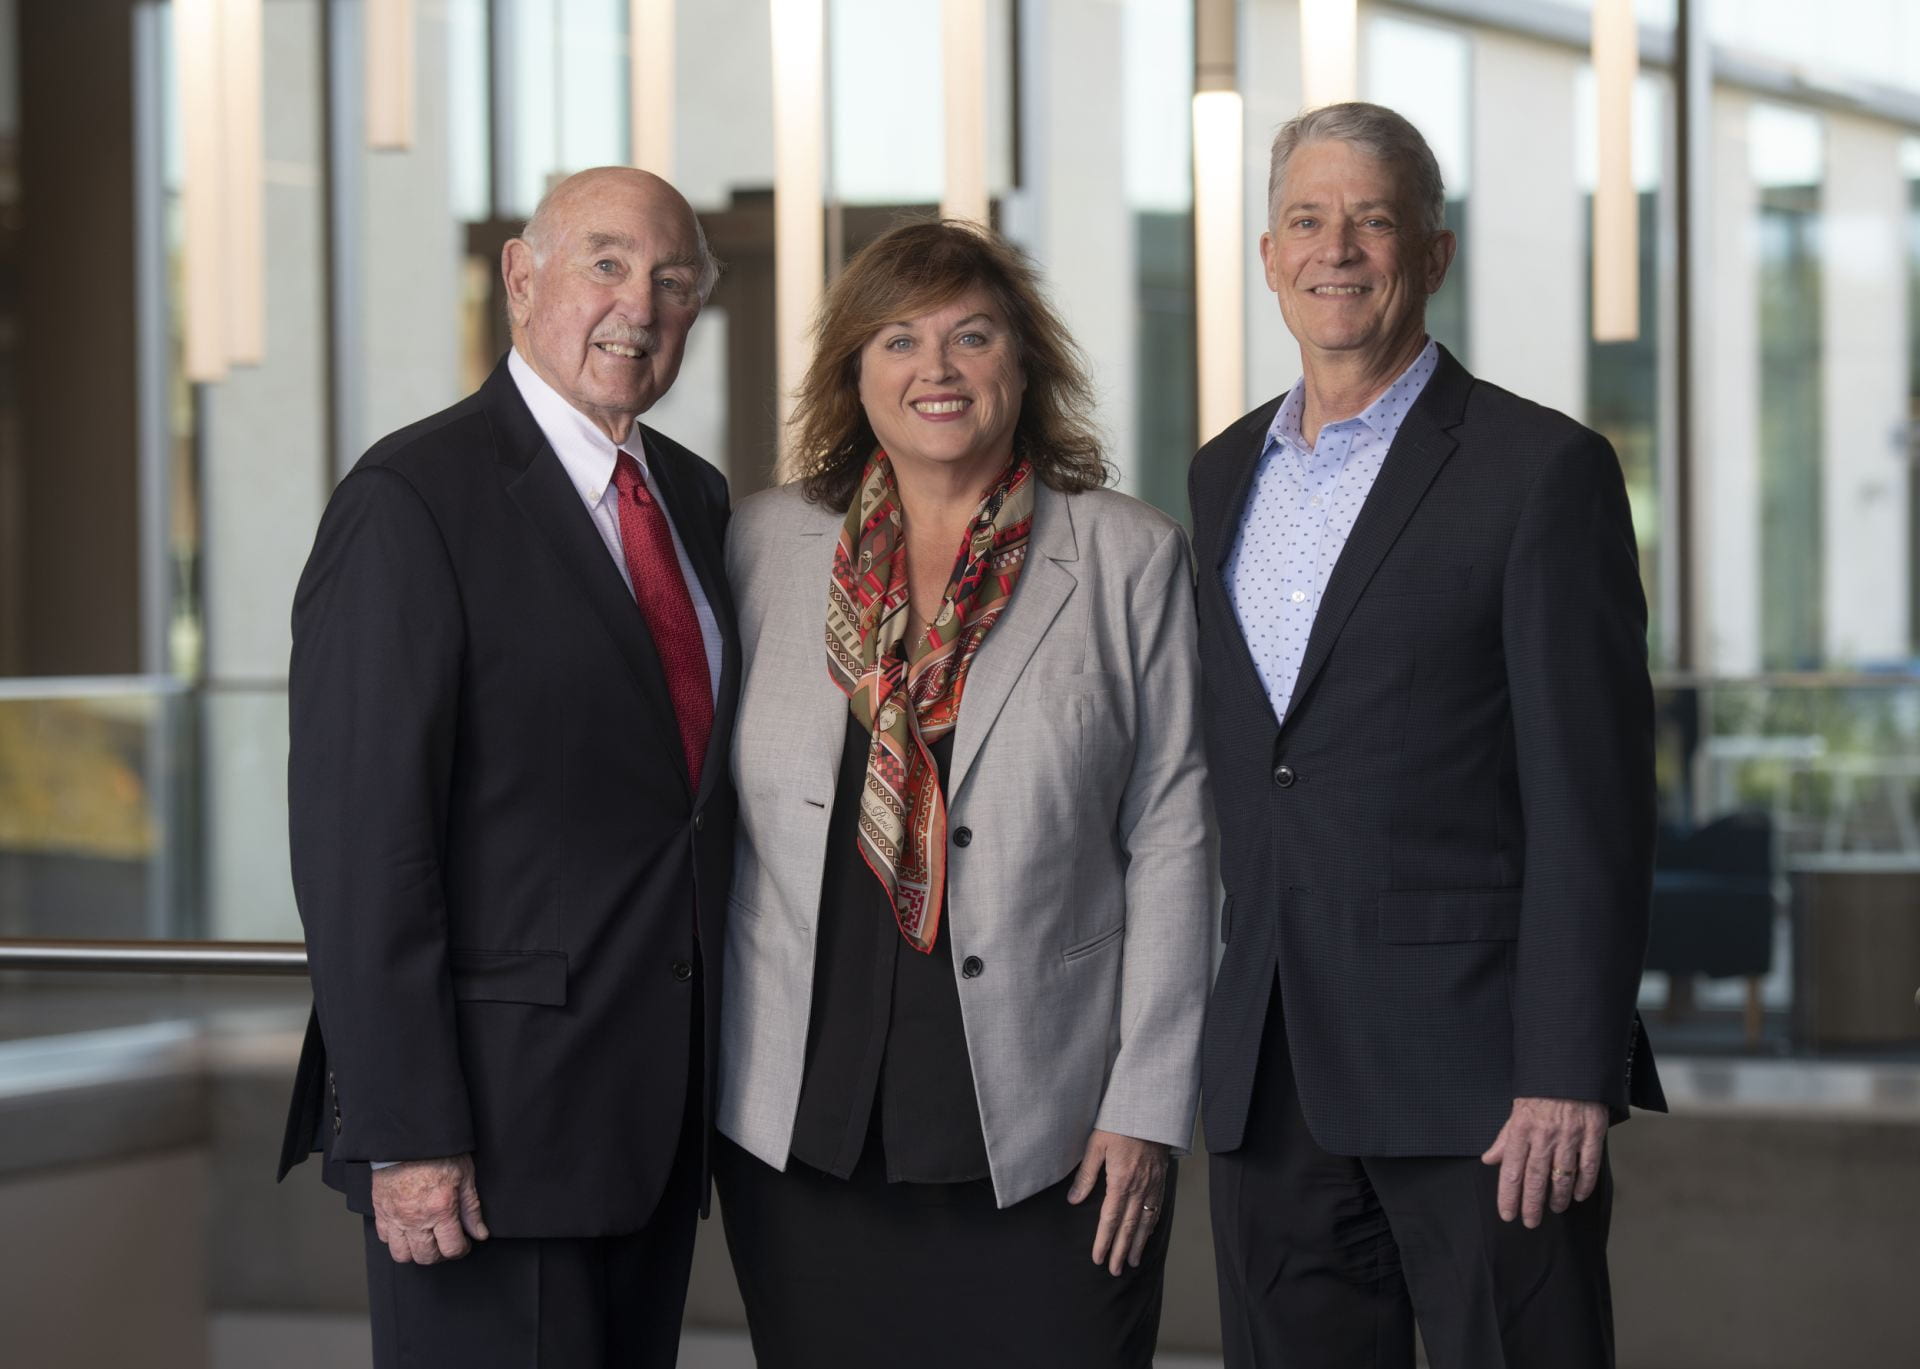 UCI’s Bernadette Boden-Albala, center, pictured with Irvine Health Foundation Board Chair Timothy L. Strader Sr., left, and President Edward B. Kacic, right.